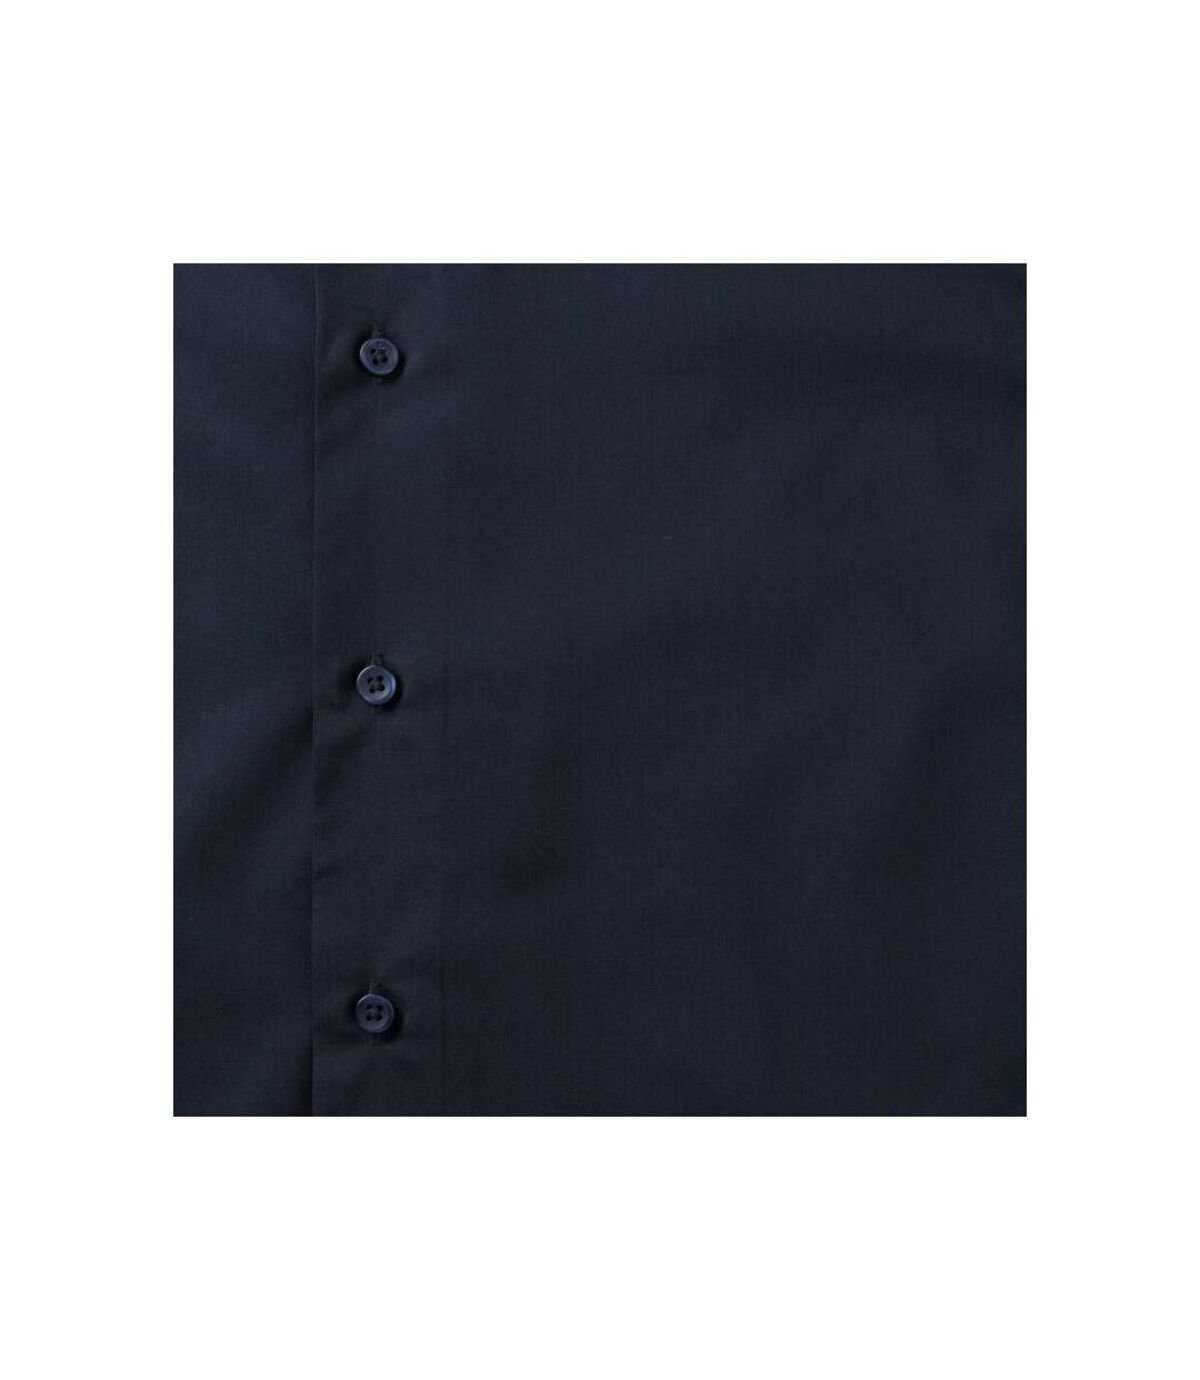 Russell Collection Mens Easy Care Tailored Poplin Shirt (French Navy)